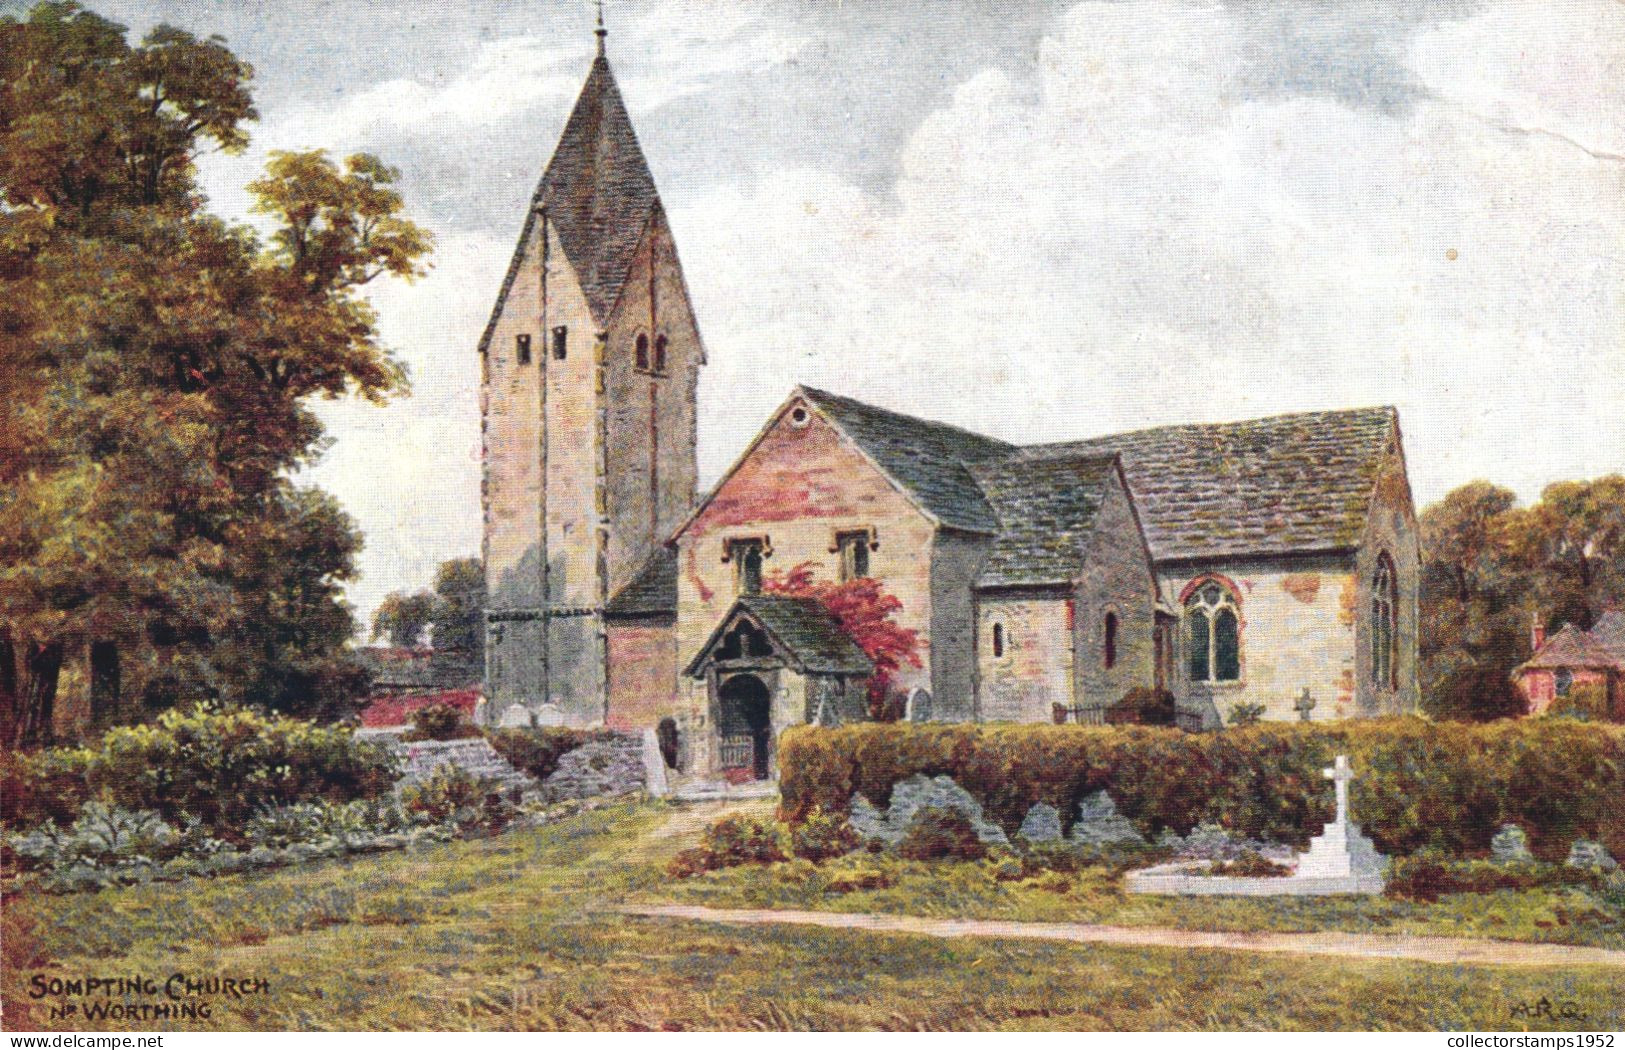 WORTHING, SUSSEX, SOMPTING CHURCH, ARCHITECTURE, GRAVE, ENGLAND, UNITED KINGDOM, POSTCARD - Worthing